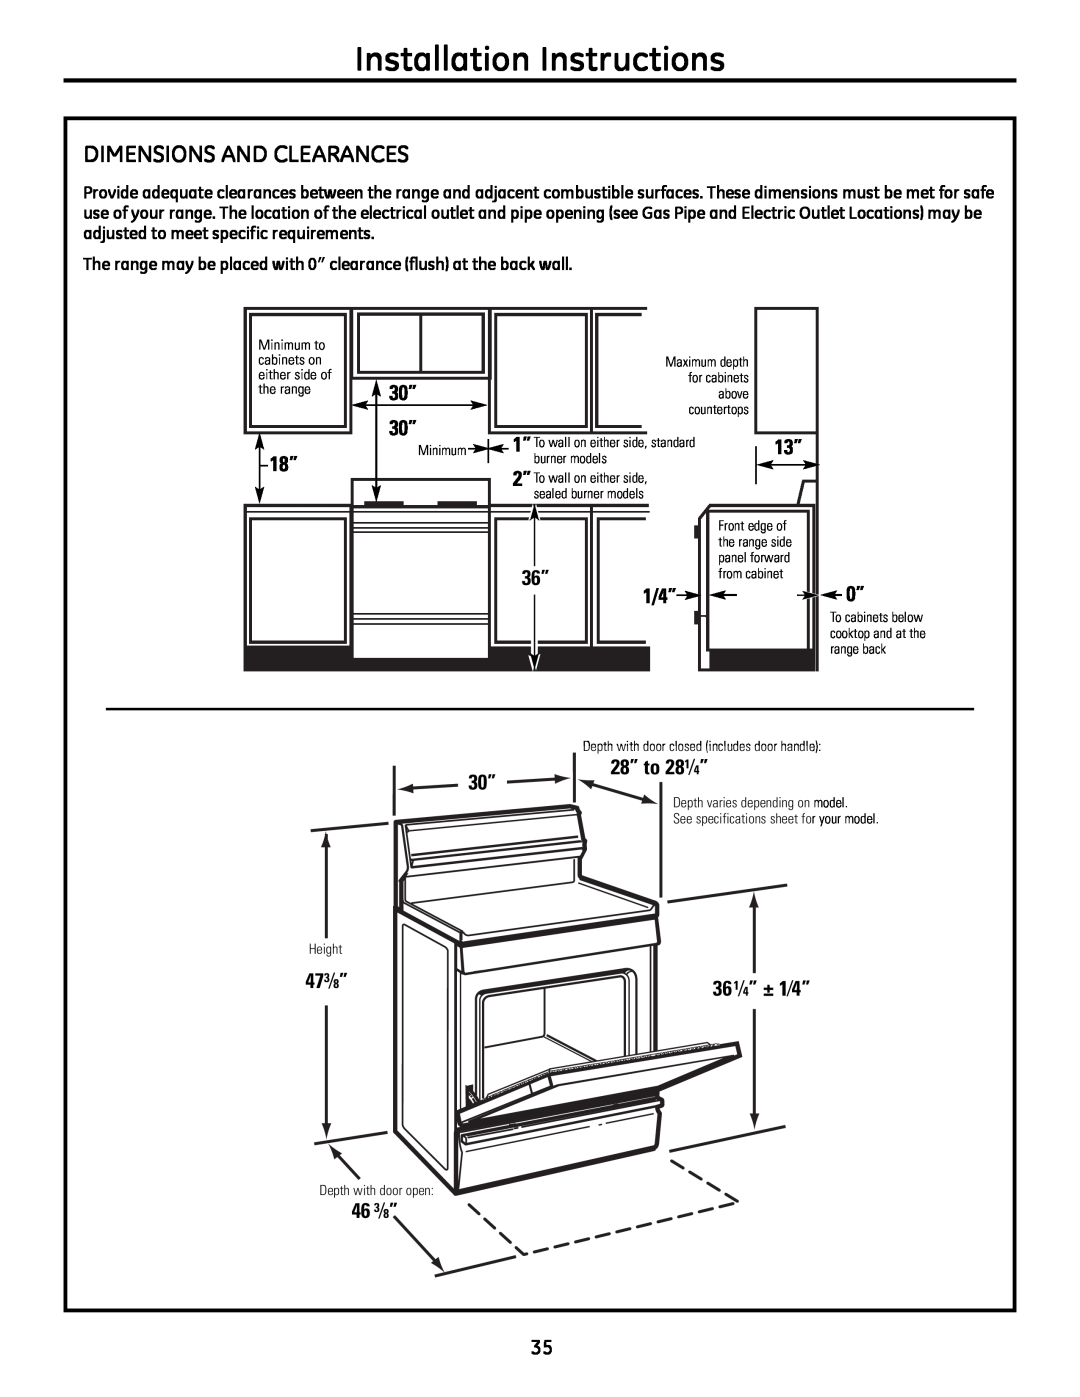 GE JgB280, JgB290 manual Installation Instructions, DIMENSIoNS AND CLEARANCES 